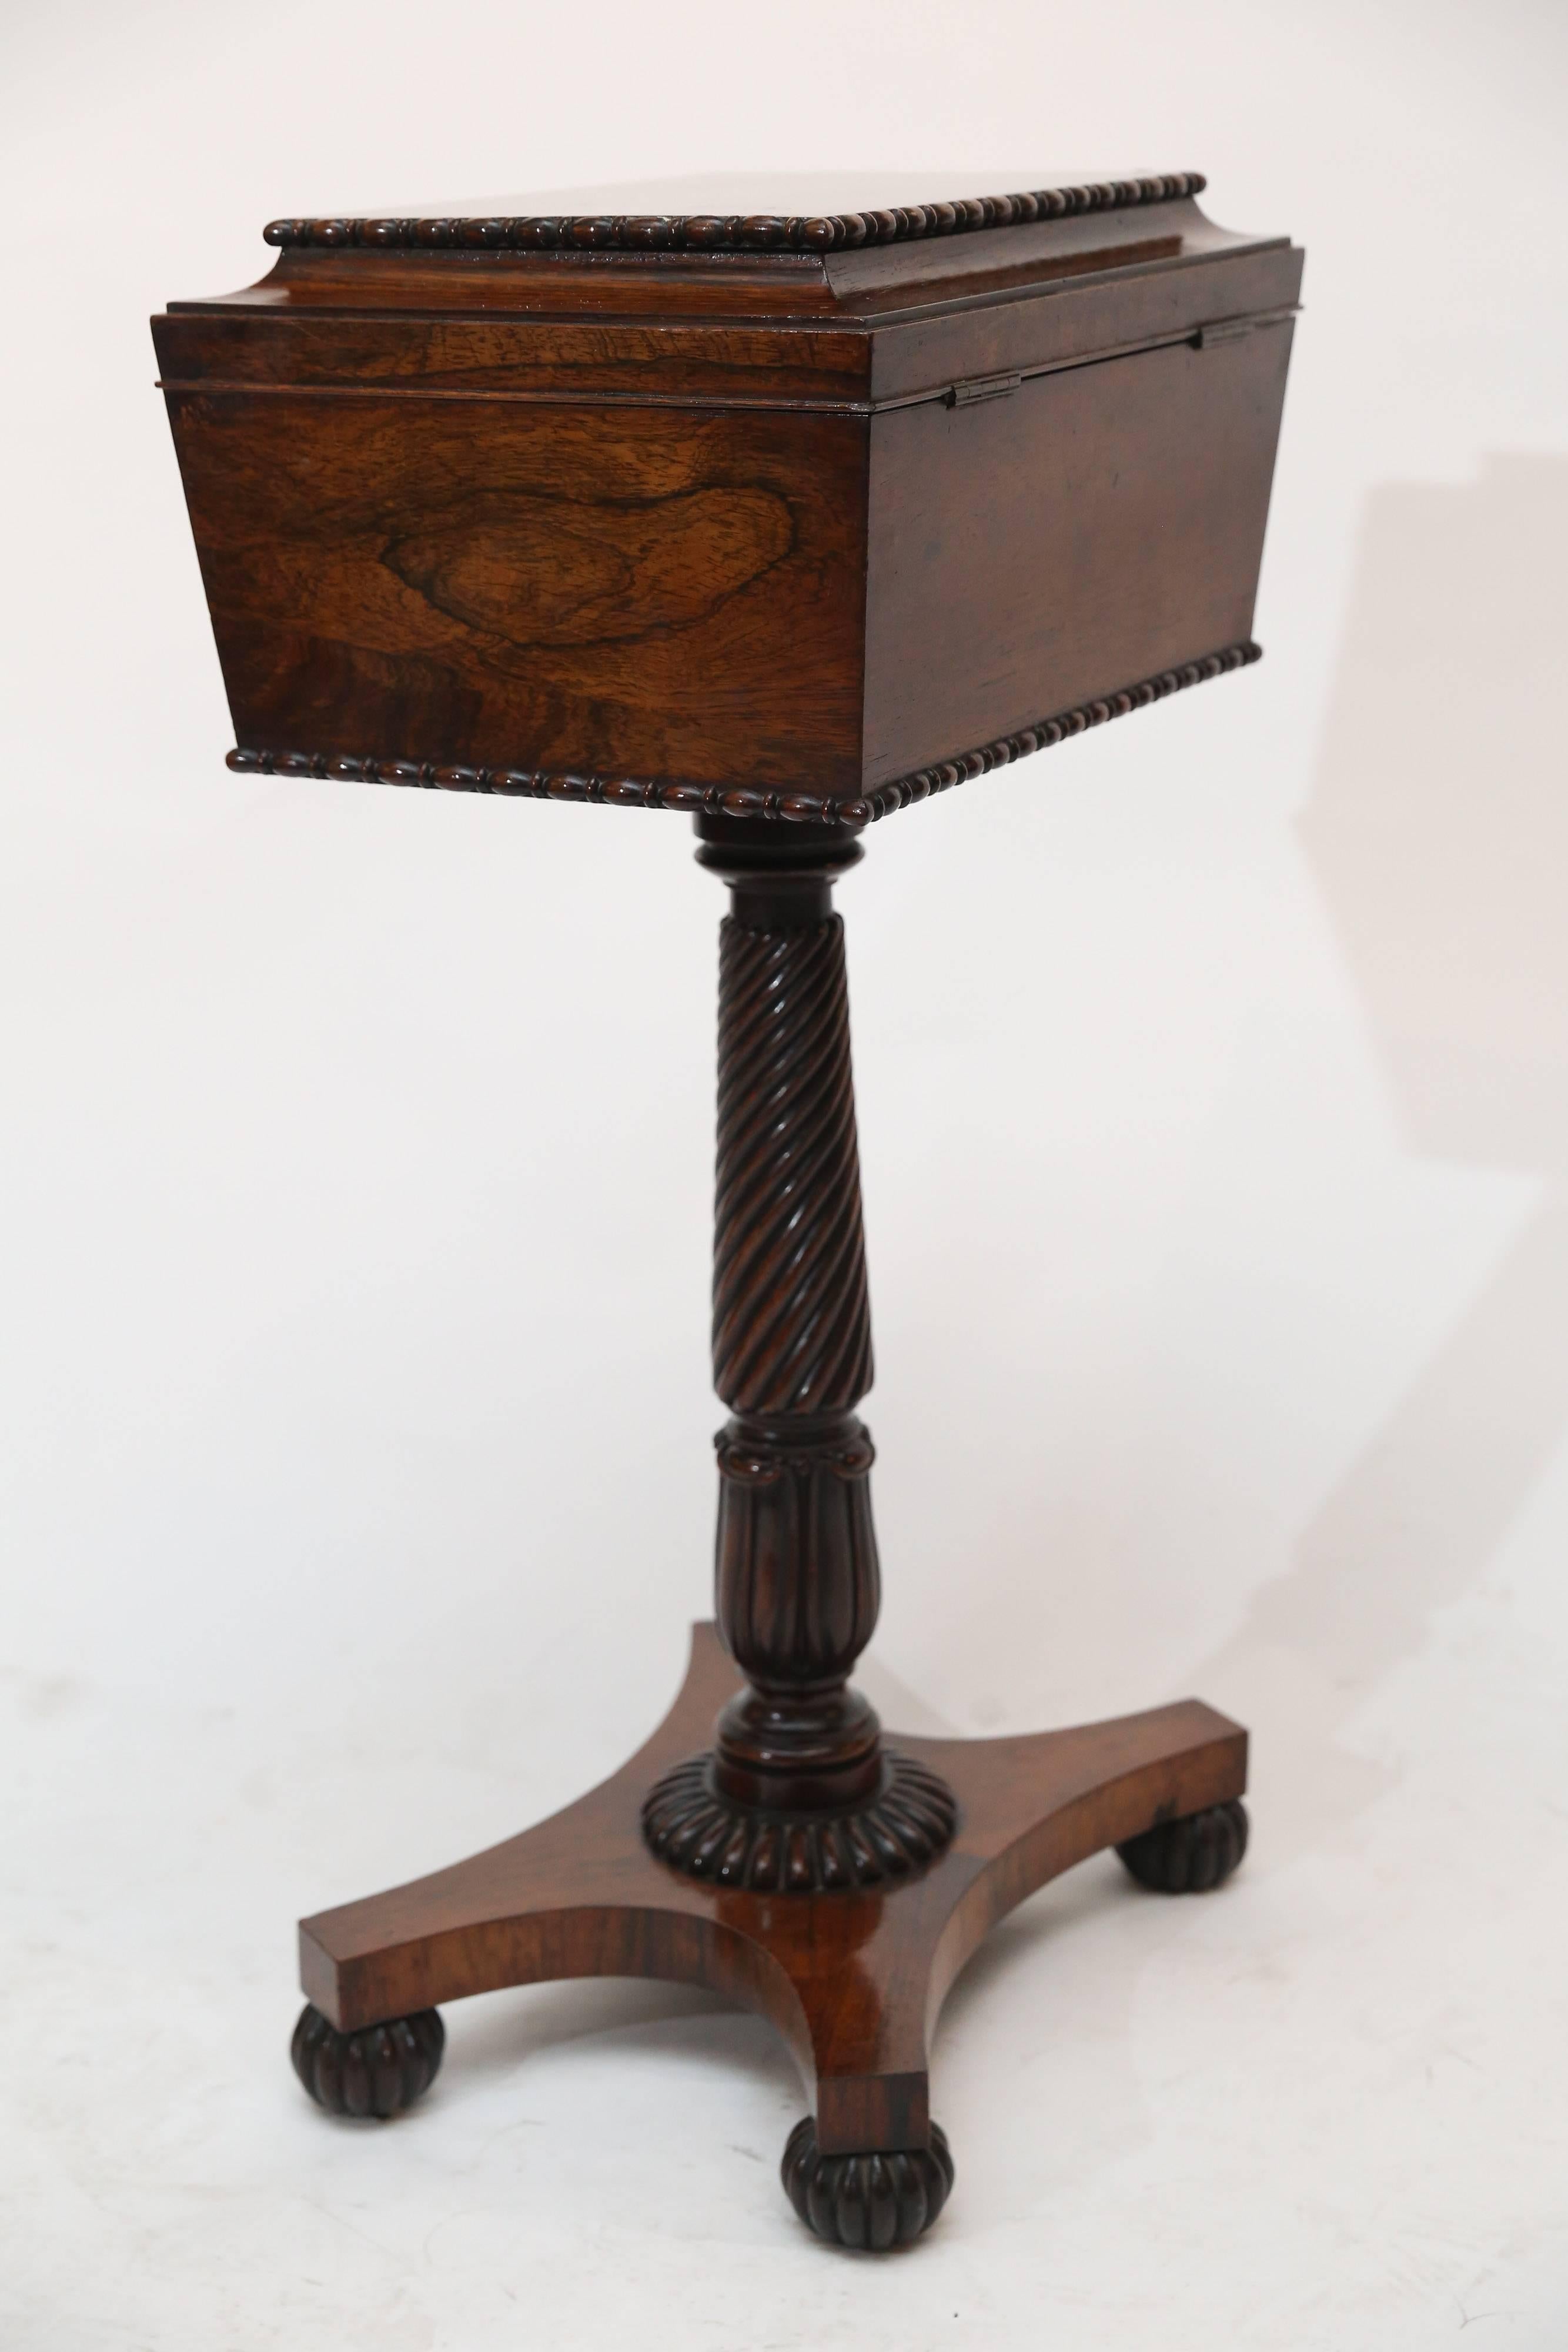 Single pedestal sewing stand is made of rosewood with a beautiful patina.

Box itself is coffin-shaped with a simple carved design around top and bottom perimeter. The top sits on a single fluted leg with four fluted ball feet.

Interior is